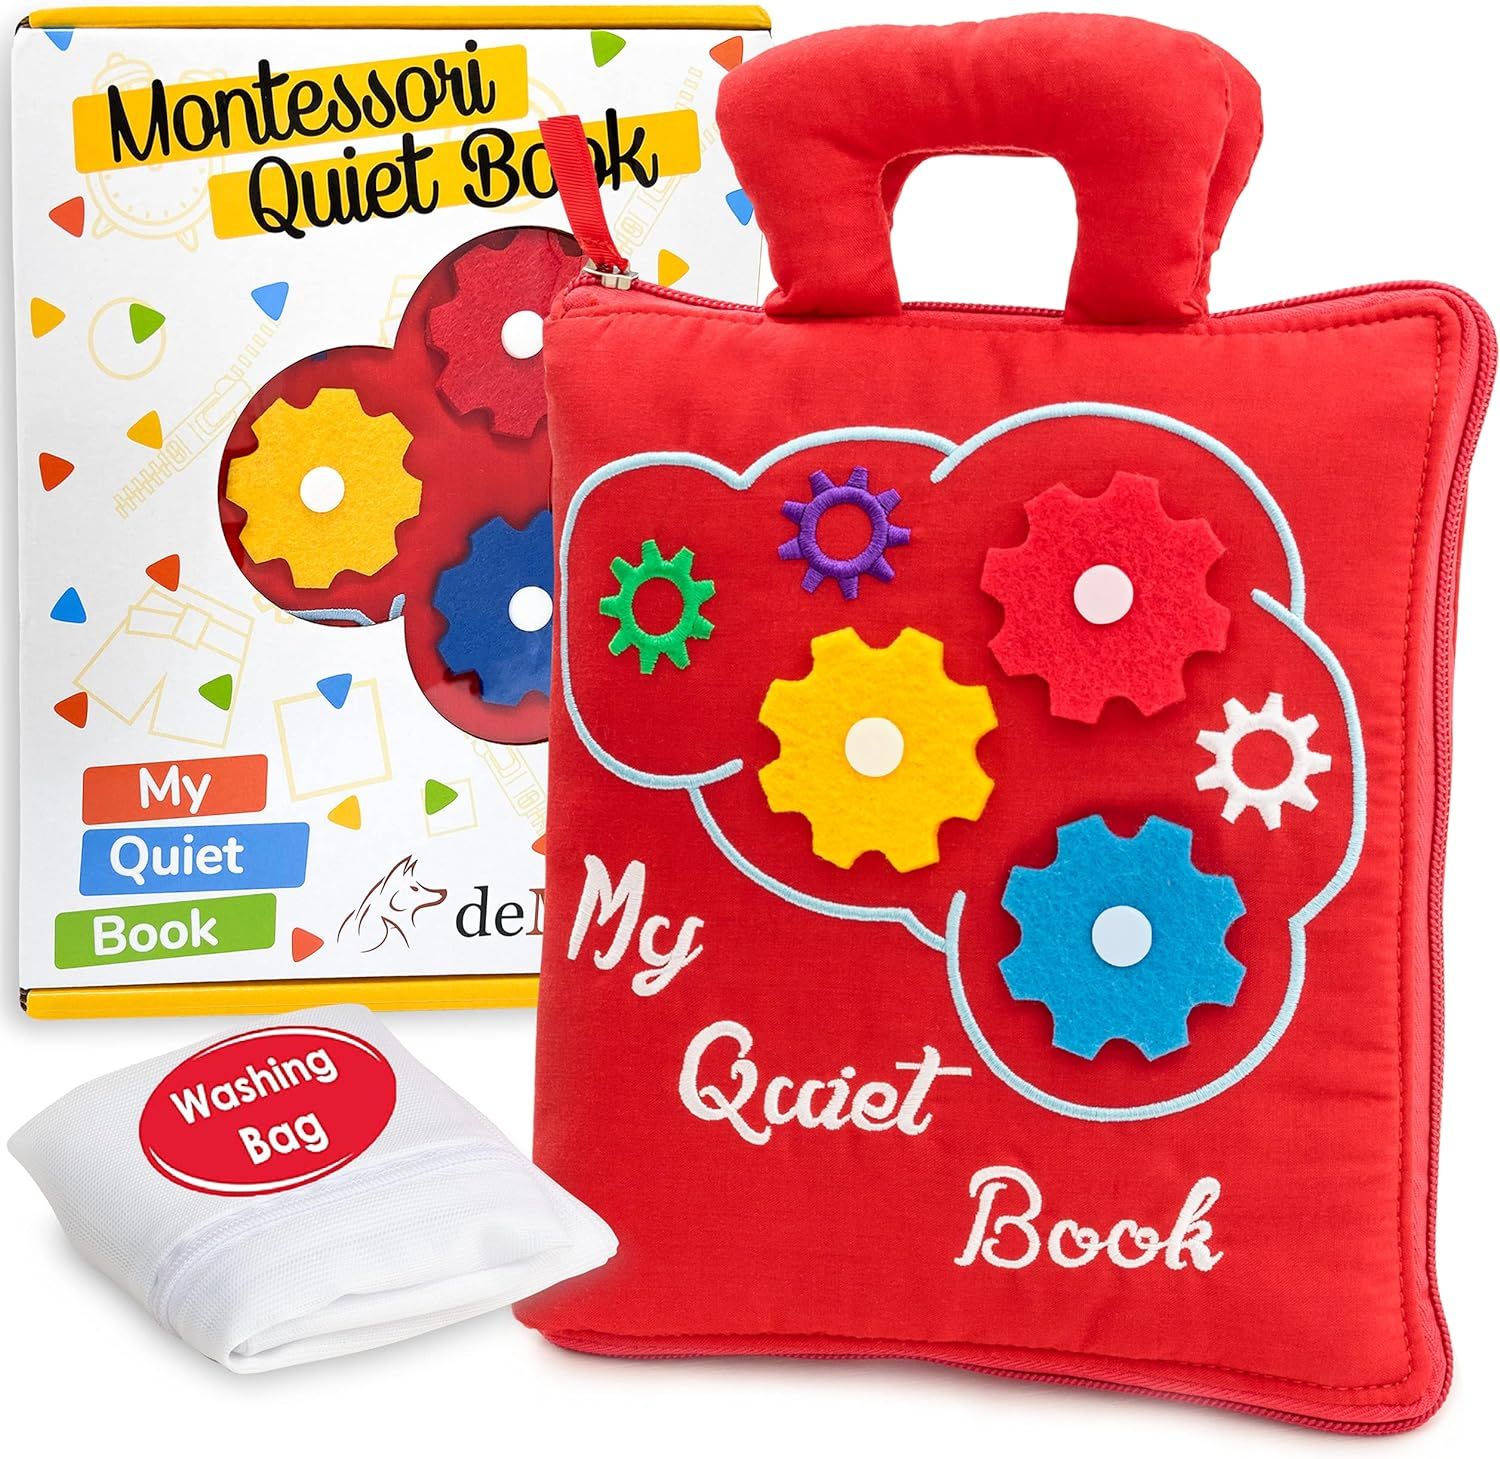 deMoca Quiet Book Montessori Toys for Toddlers – Travel Toy – Educational Toy with 9 Sensory ... | Amazon (US)